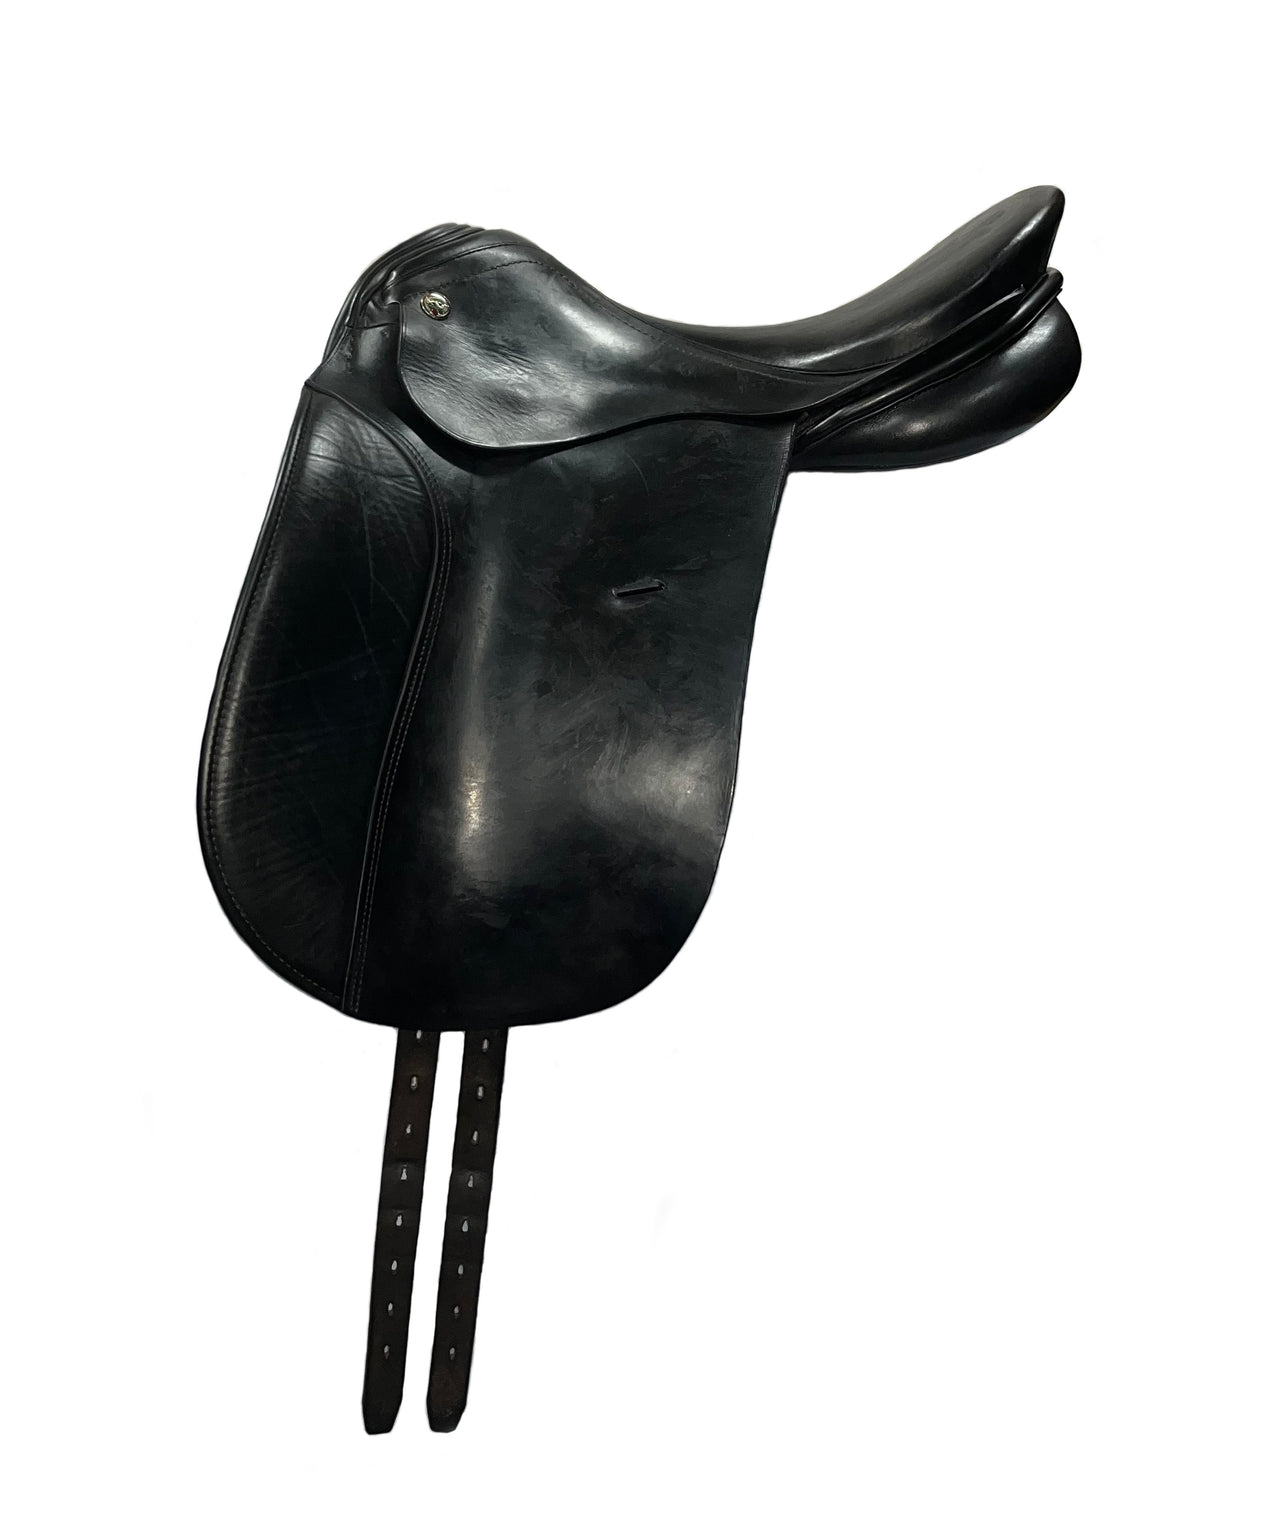 KN Dressage Saddle 17 Inch Second Hand - The Trading Stables